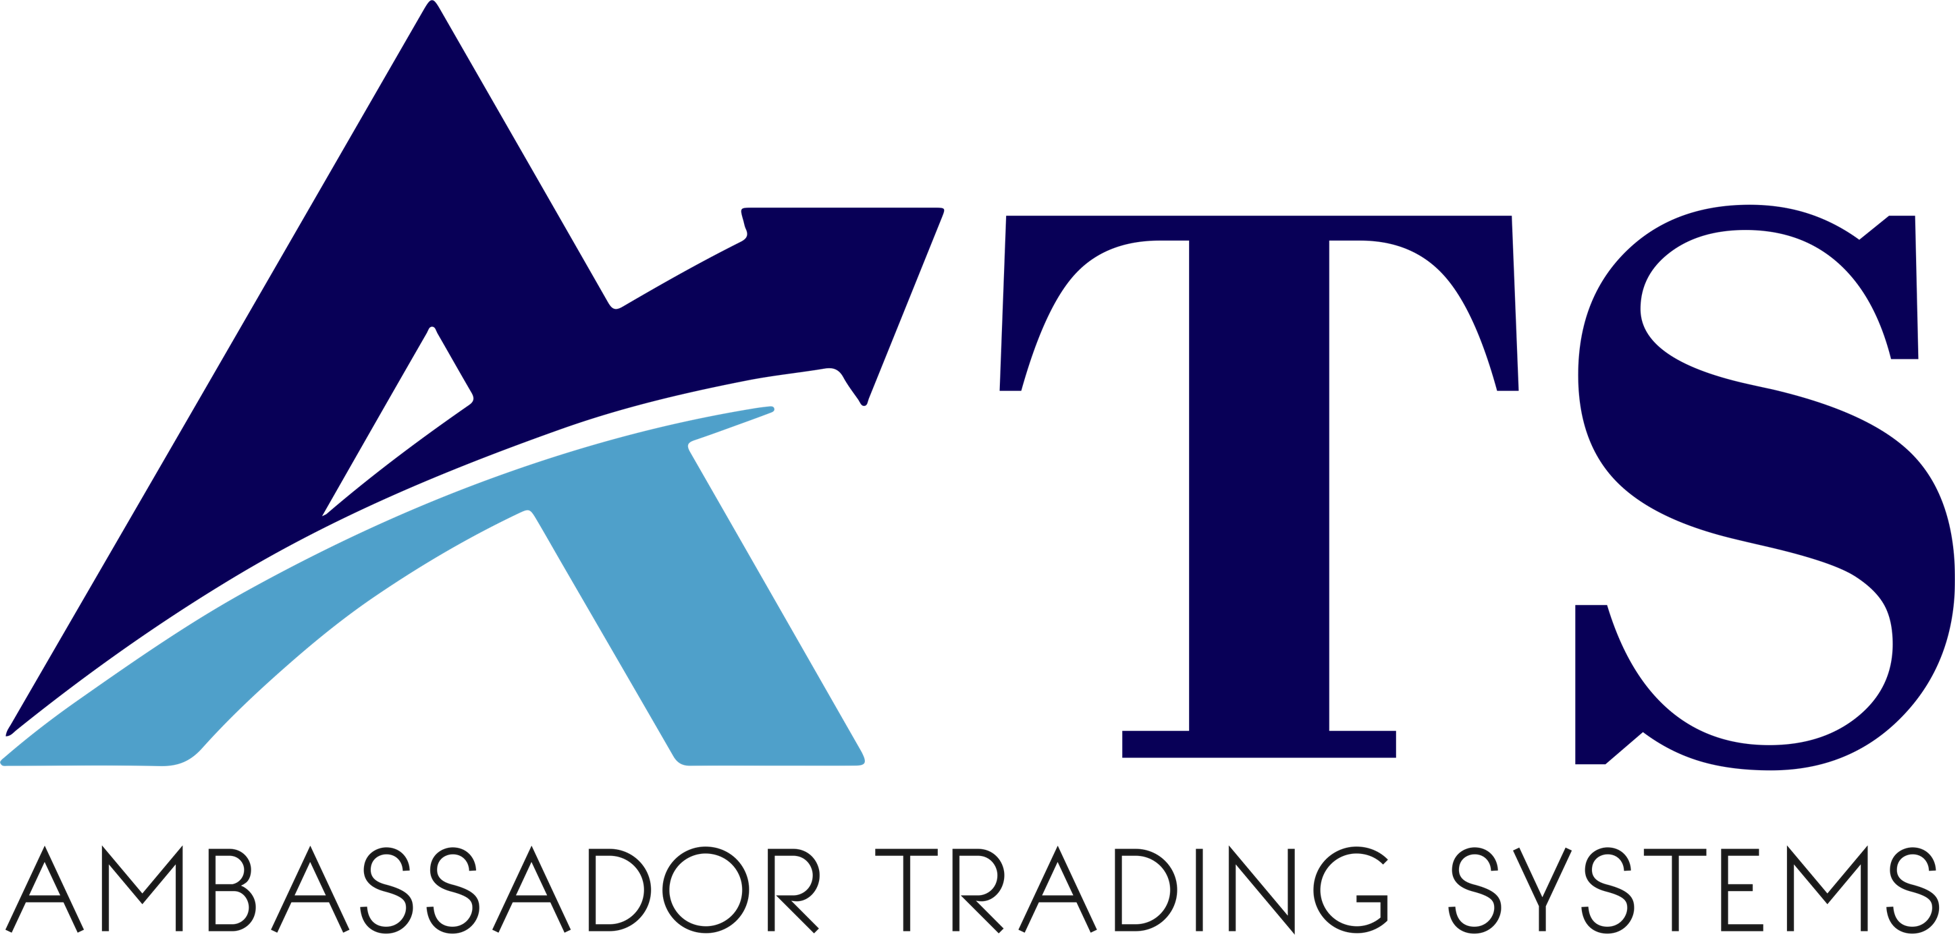 Digital Securities: Secondary Market Trading ATS - KoreConX all-in-one platform